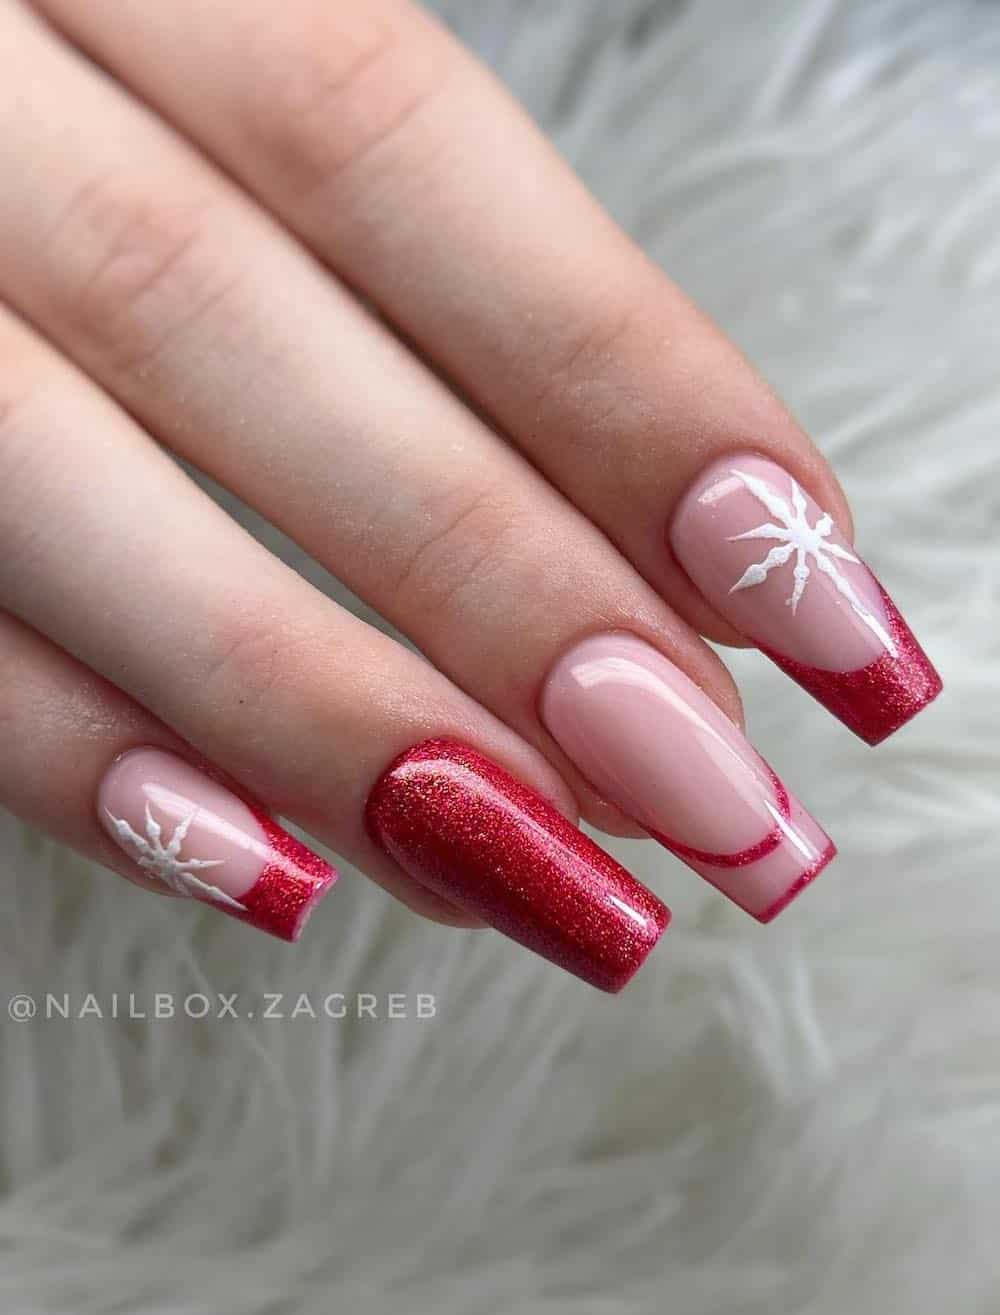 Red french tip manicure with red glitter and white snowflake detials.